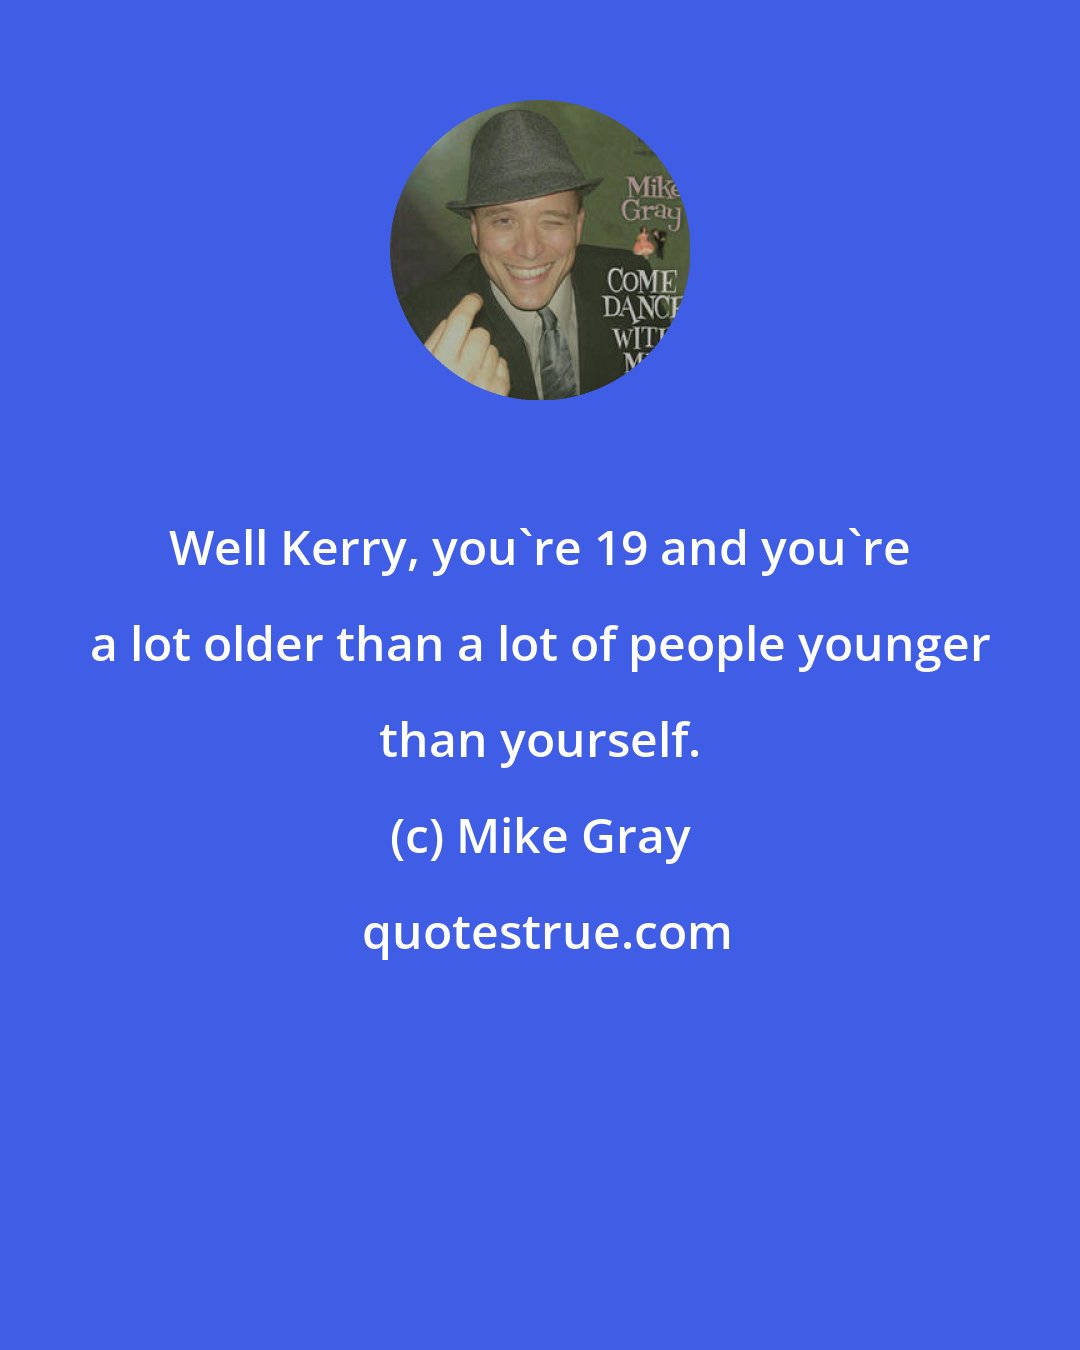 Mike Gray: Well Kerry, you're 19 and you're a lot older than a lot of people younger than yourself.